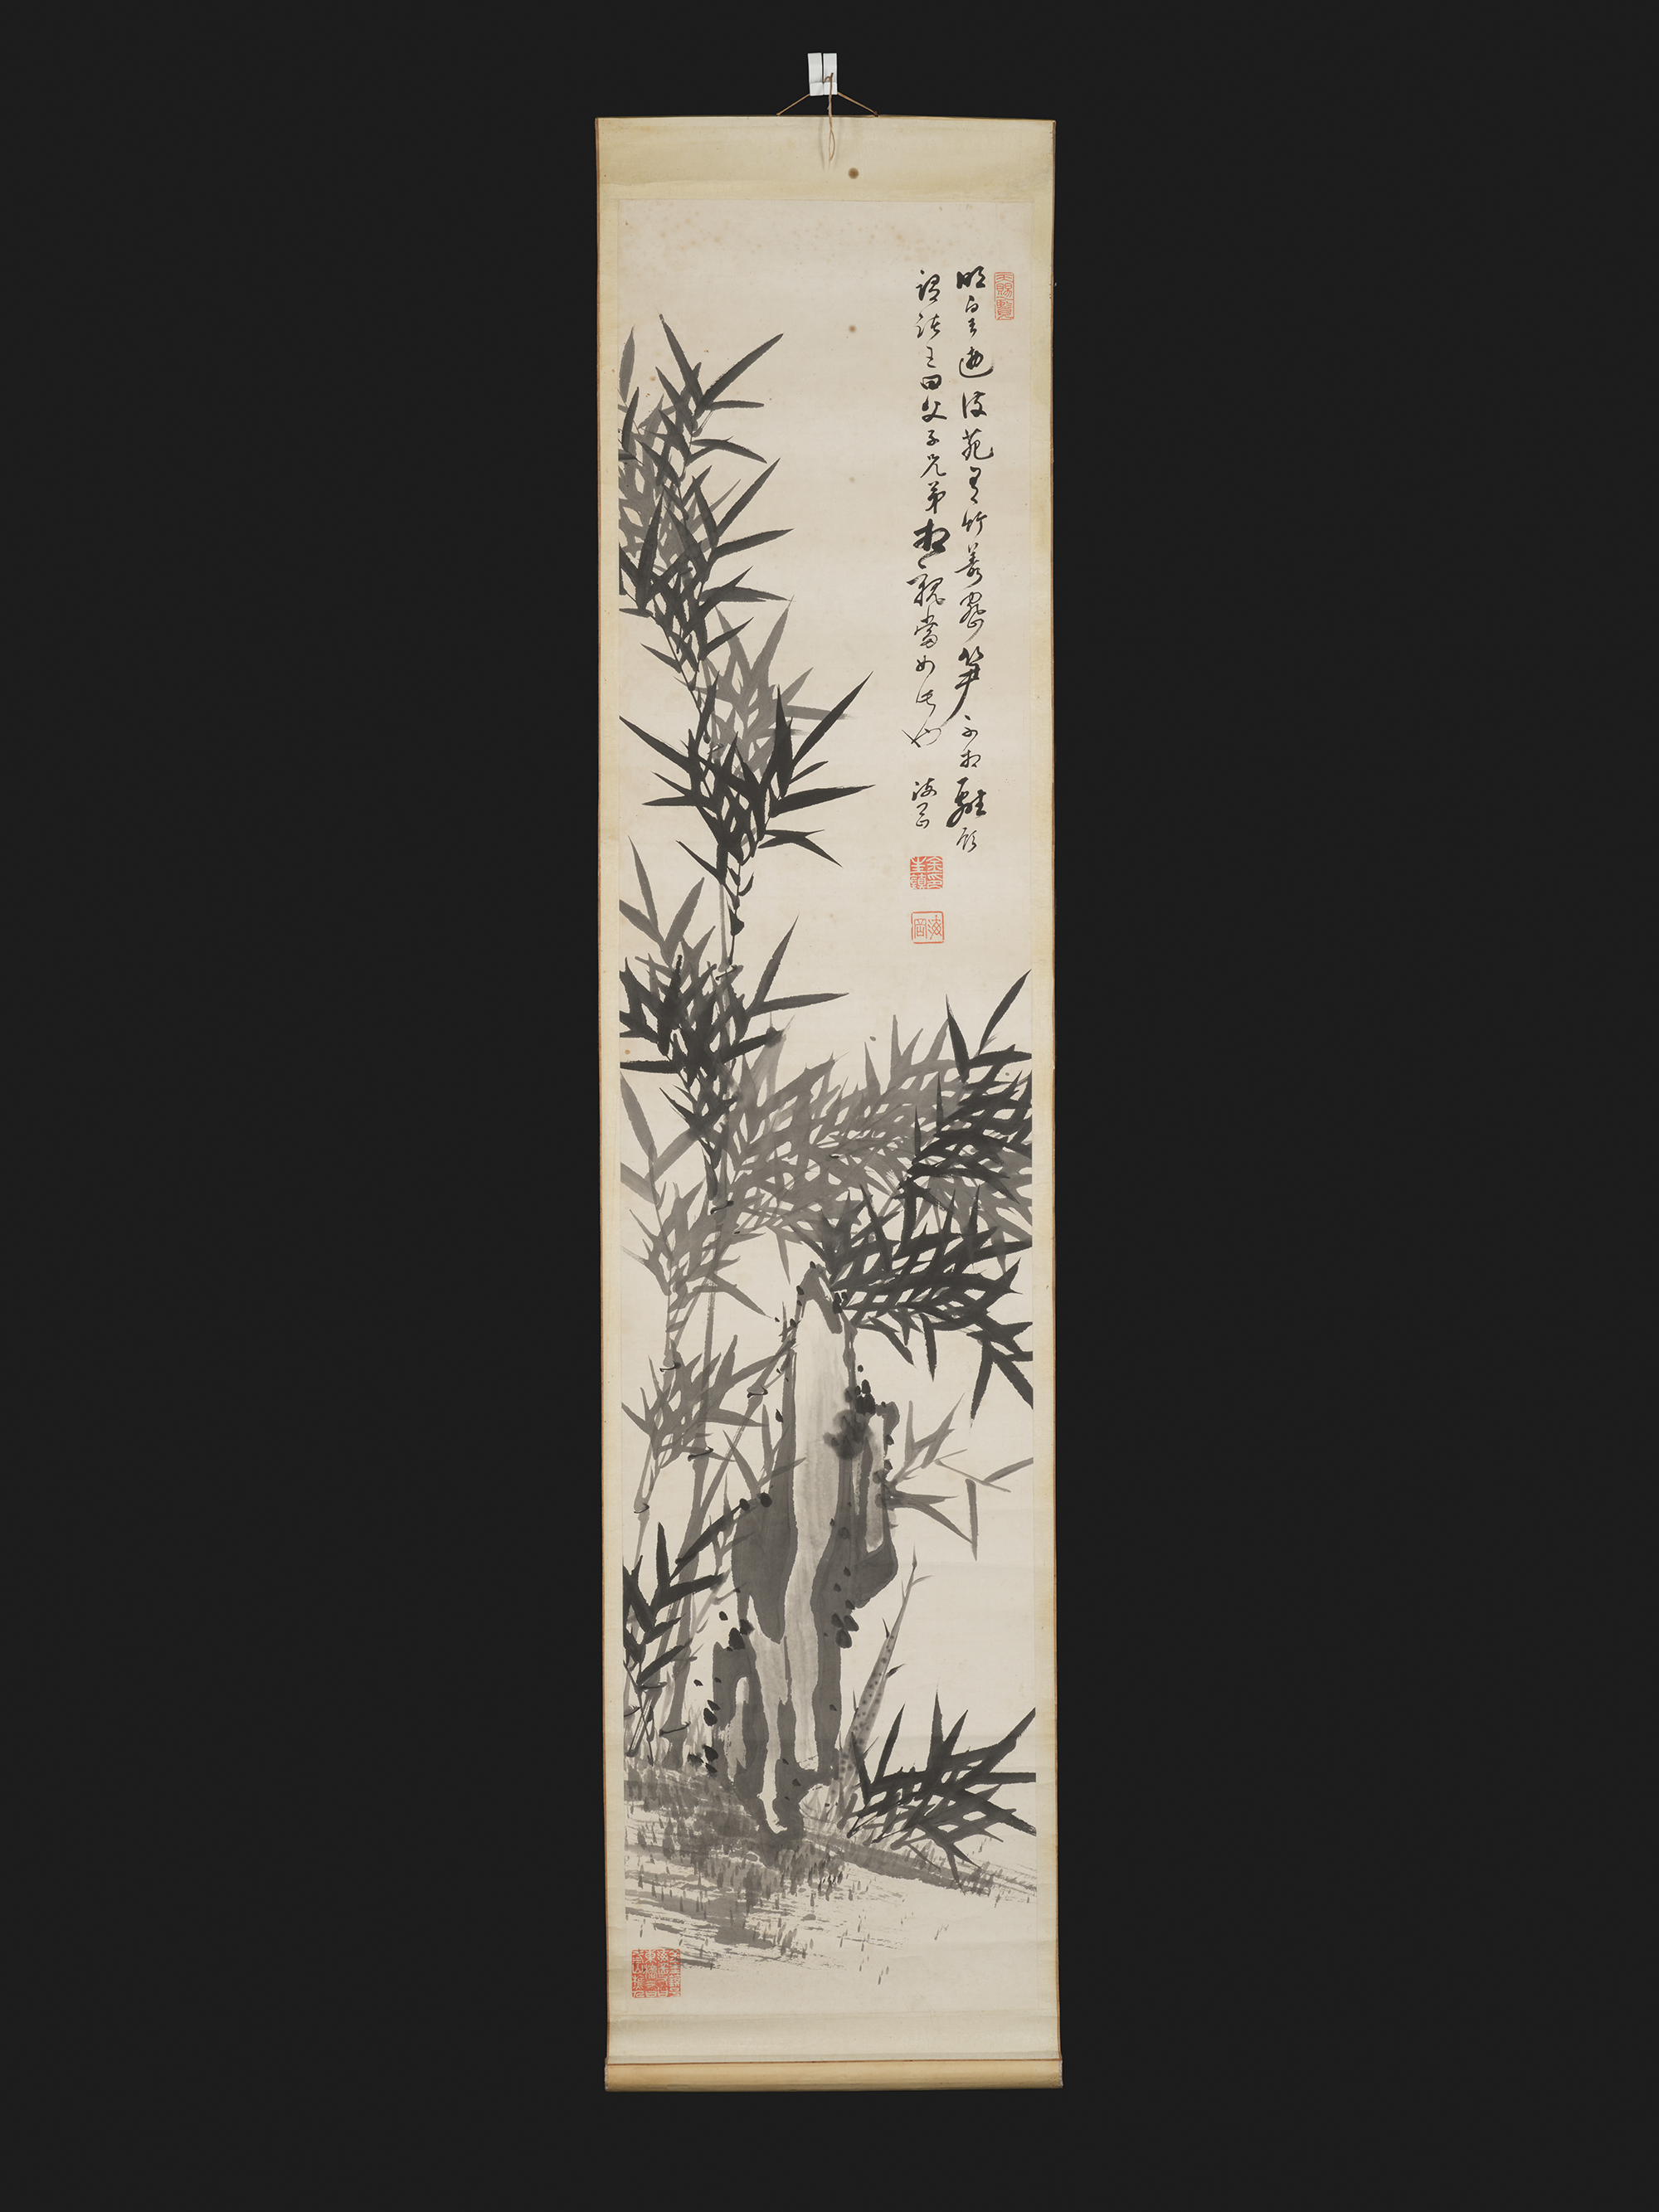 Hanging scroll painting of bamboo, seals and a signature.